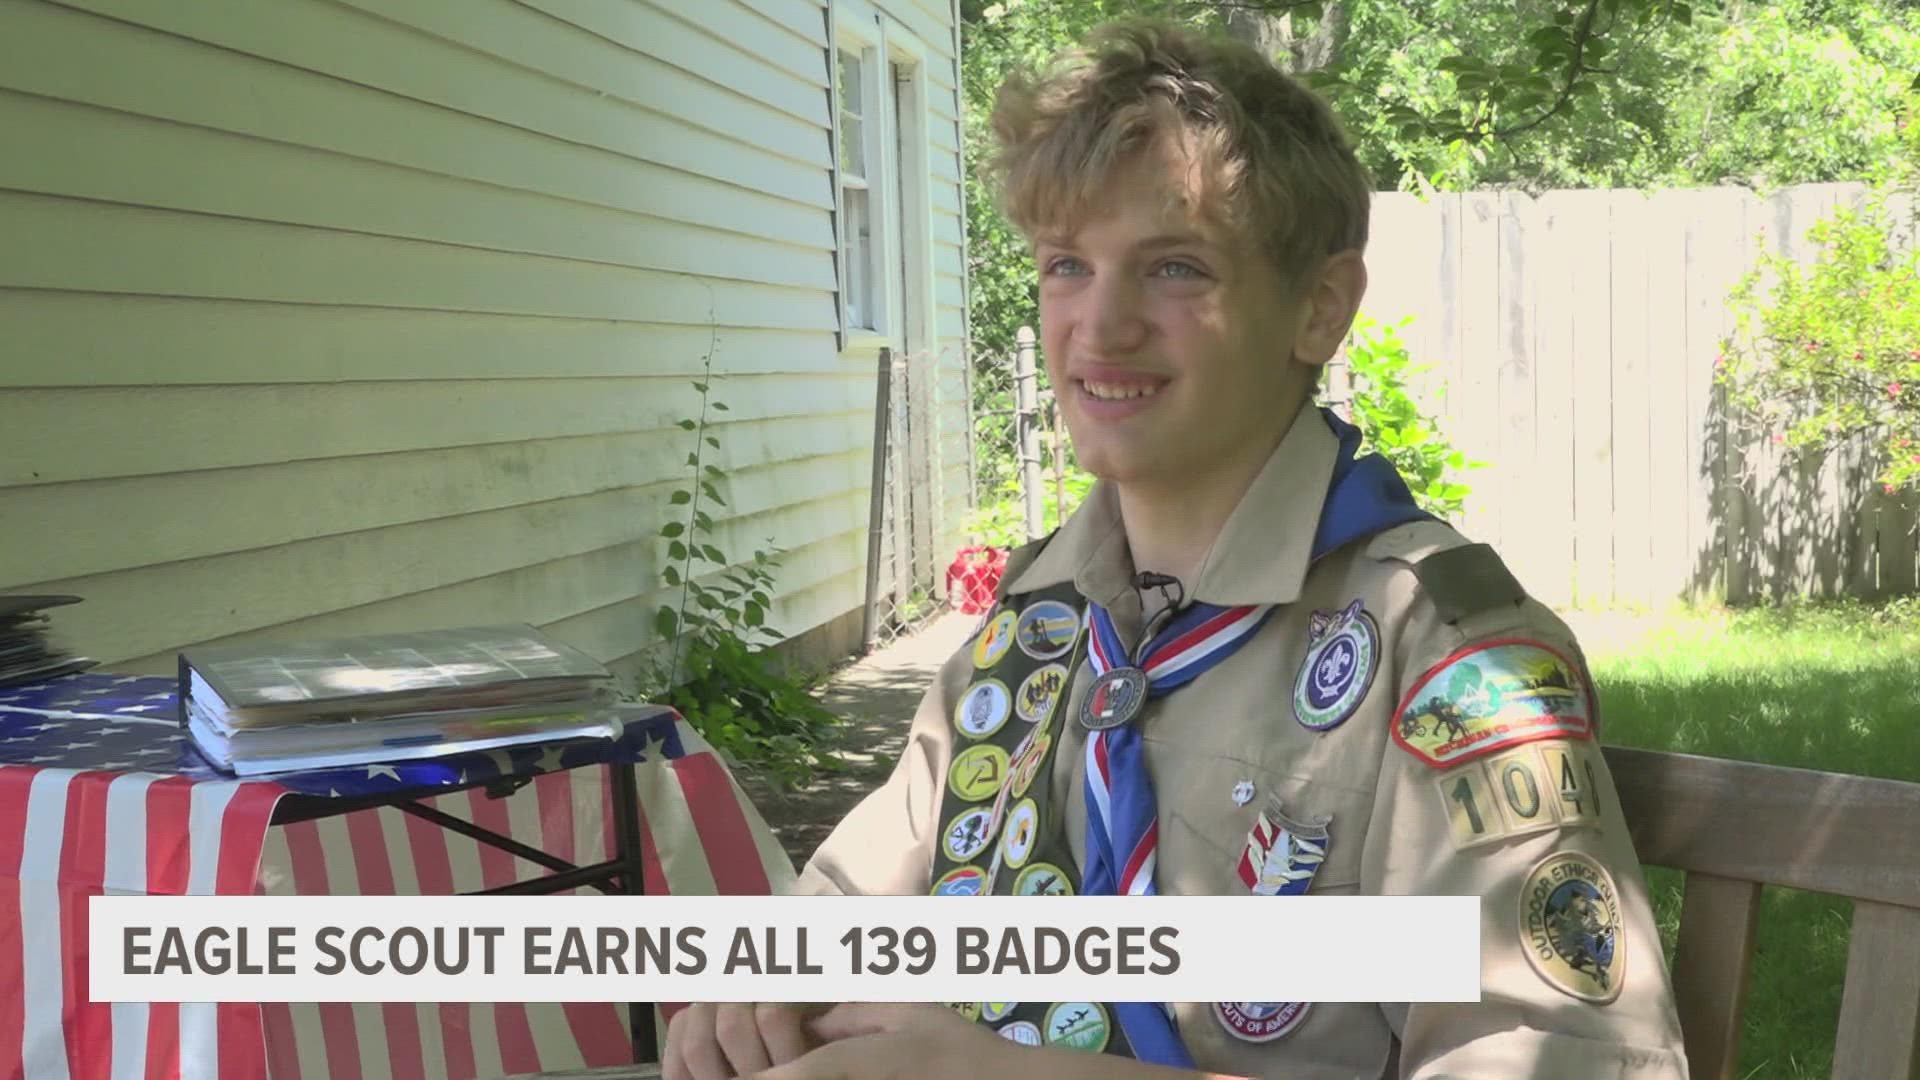 Less than .5% of all Eagle Scouts earn this honor.